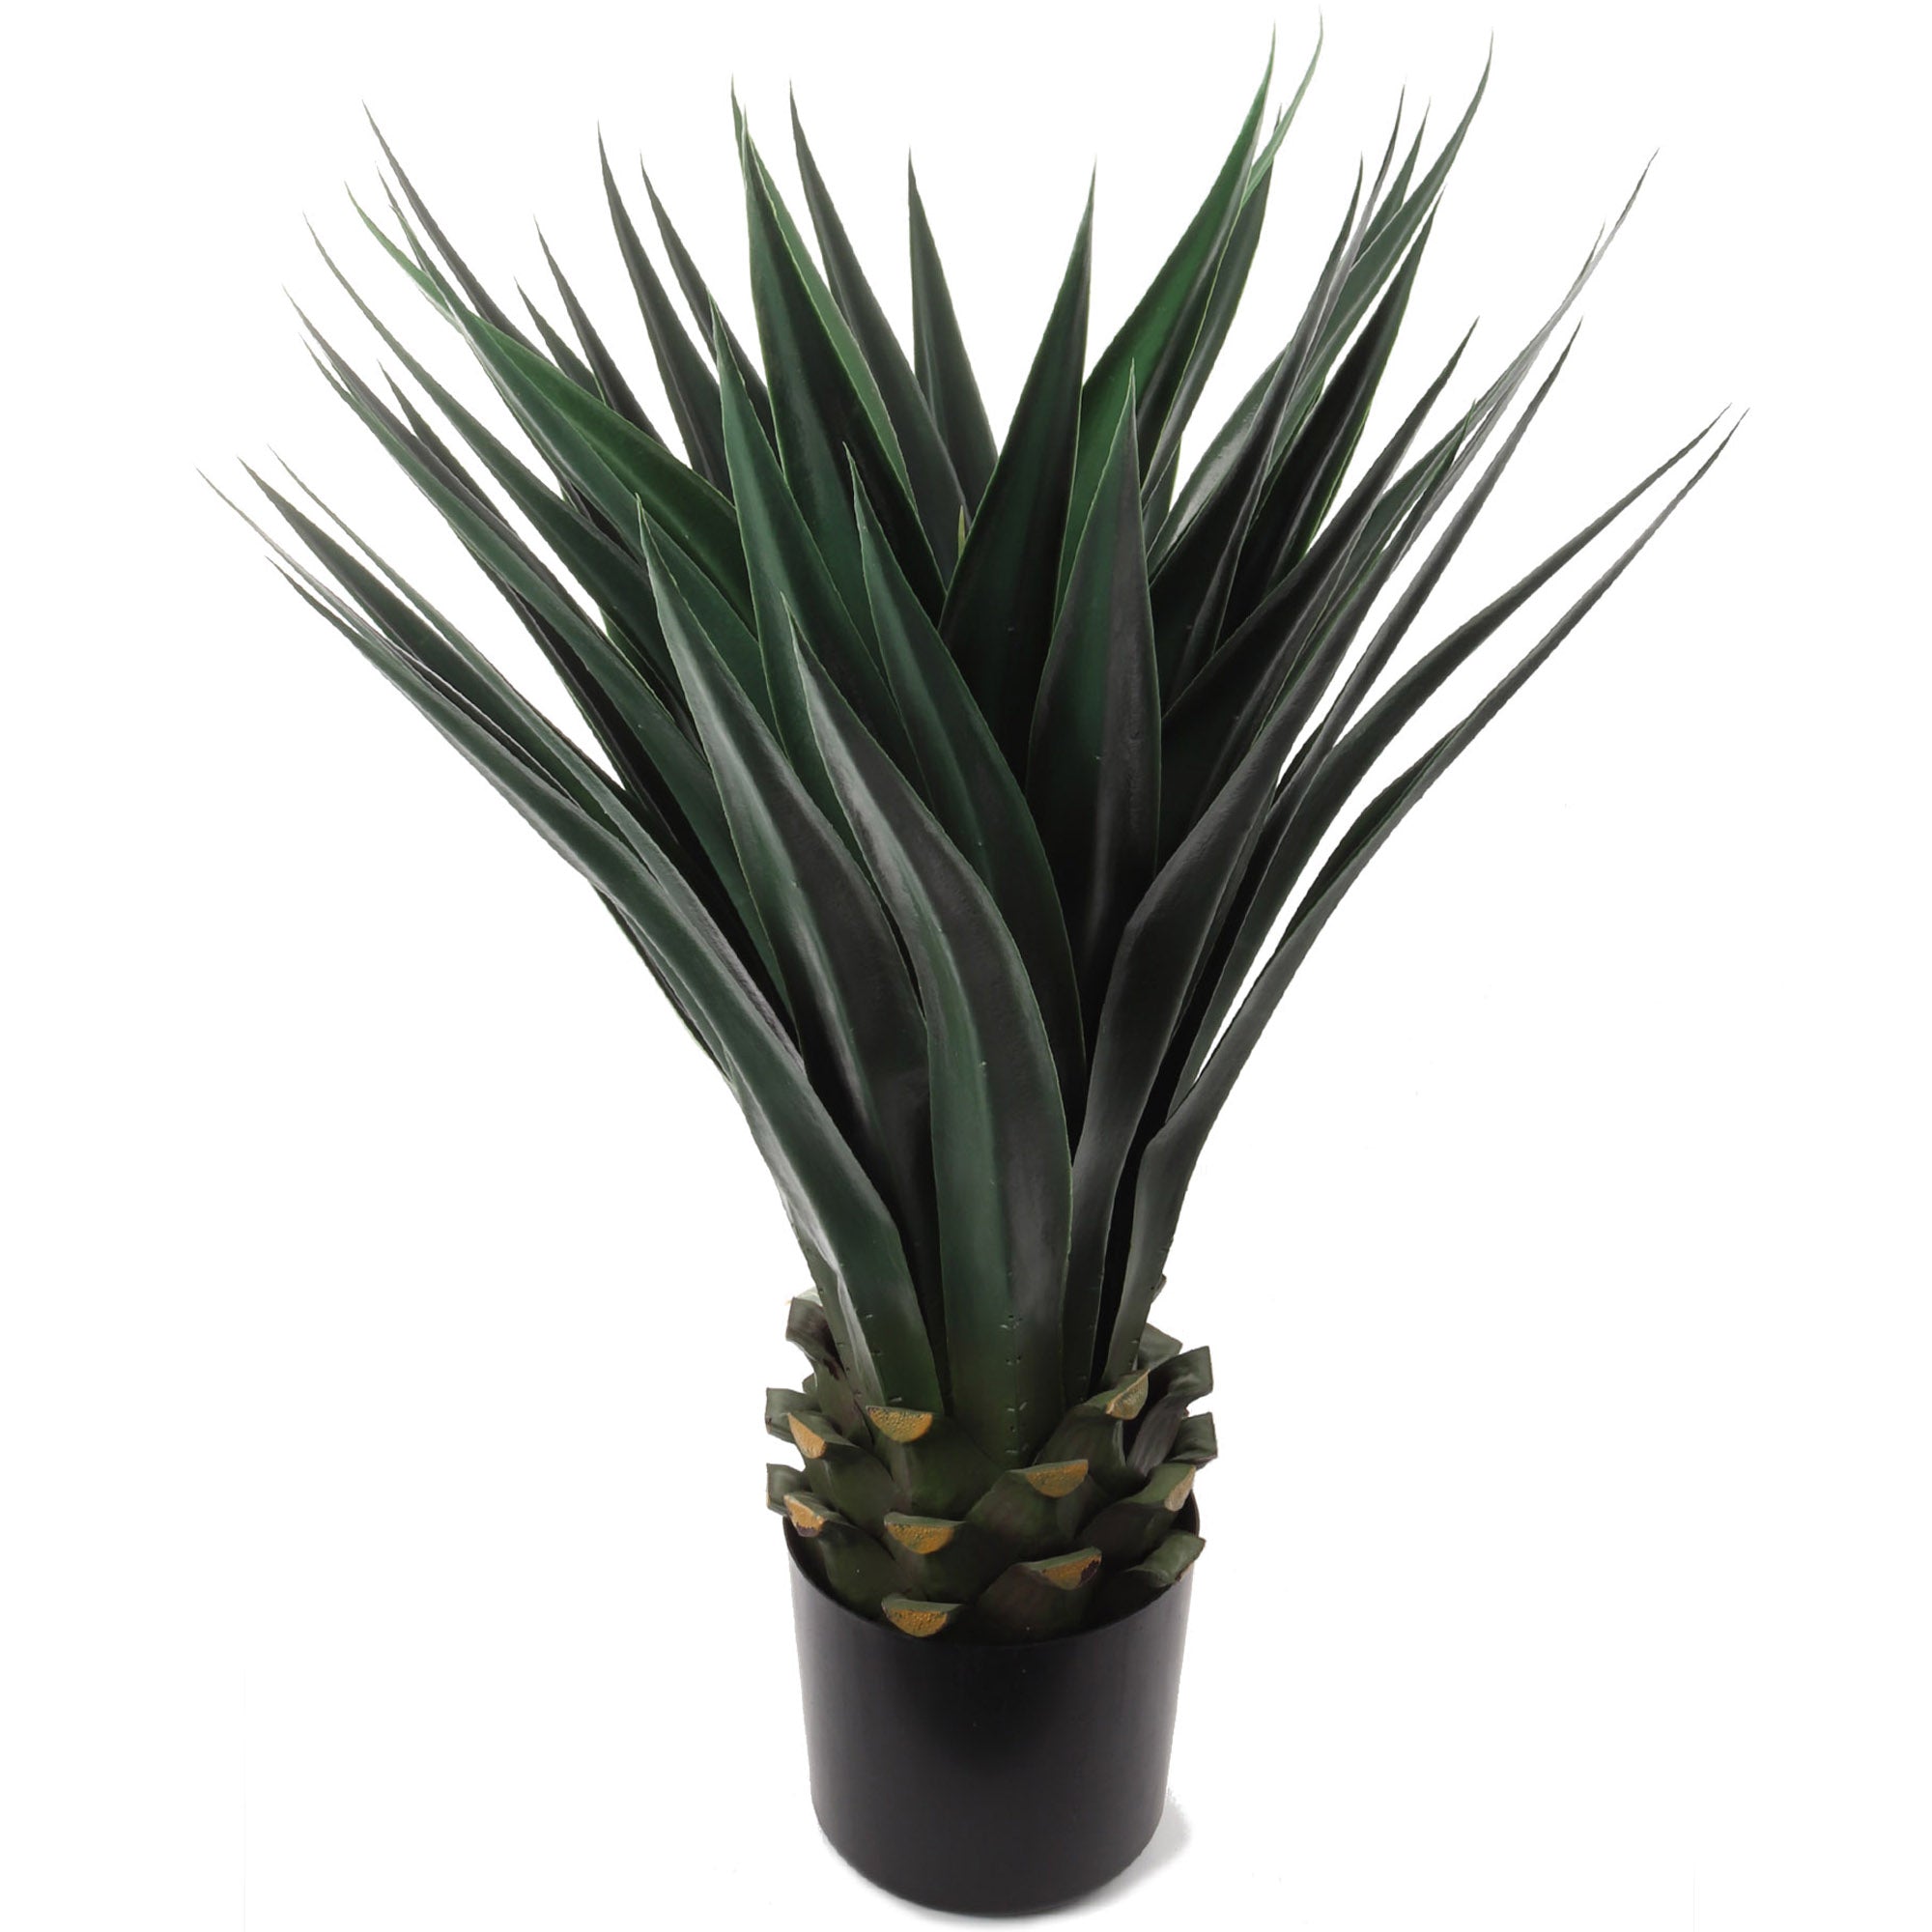 36" Artificial Agave Plant with 50 Leaves in Pot - Lifelike Faux Greenery, UV-Resistant, Low-Maintenance - Indoor/Outdoor Decor for Home, Office, Patio, or Garden Spaces agave ArtificialFlowers   